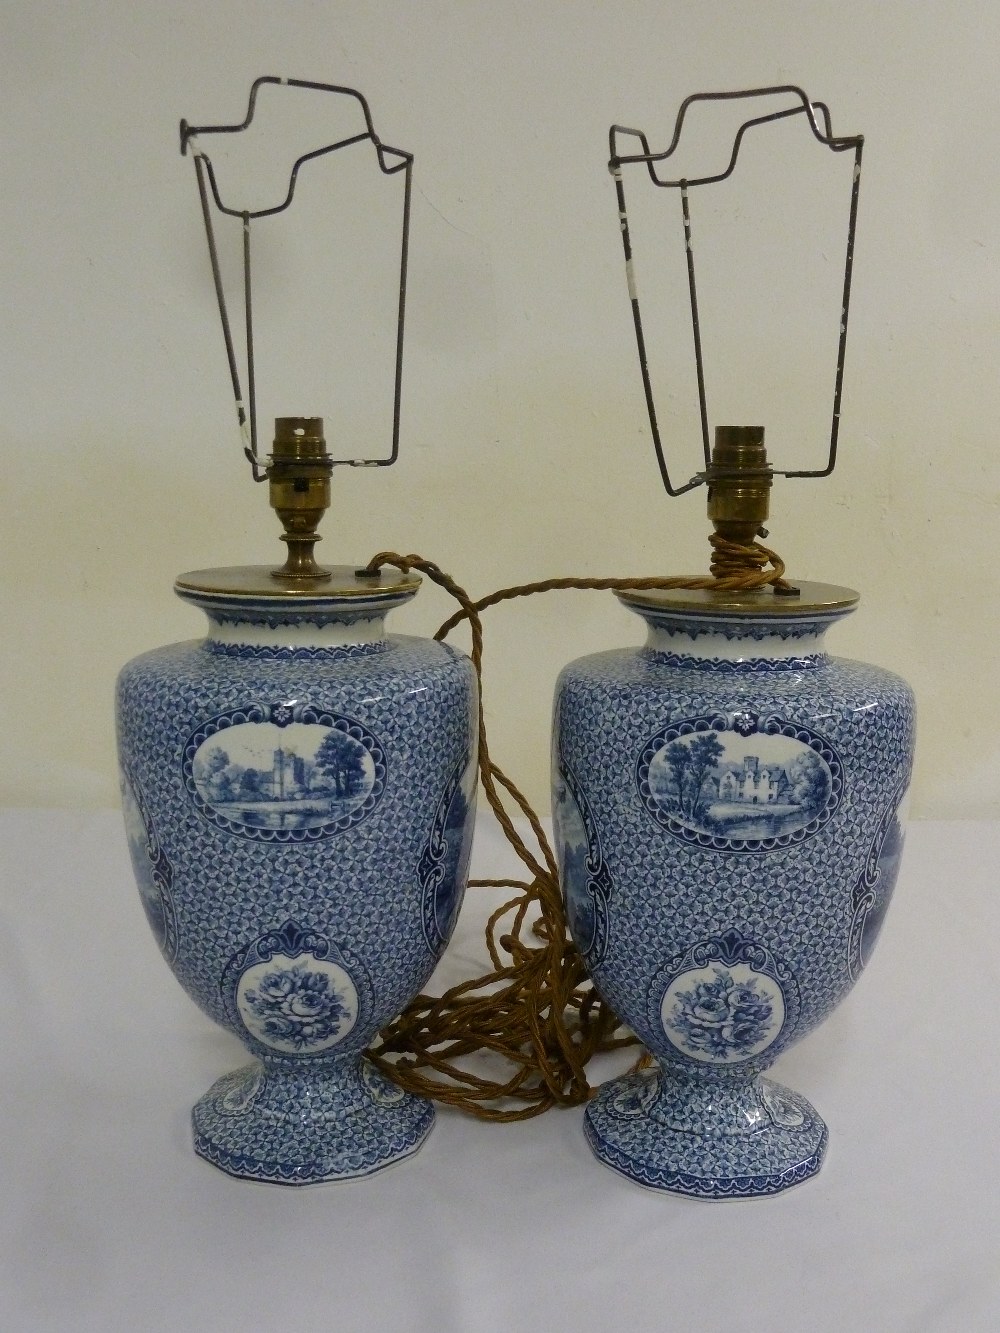 Pair of blue and white porcelain vase form table lamps